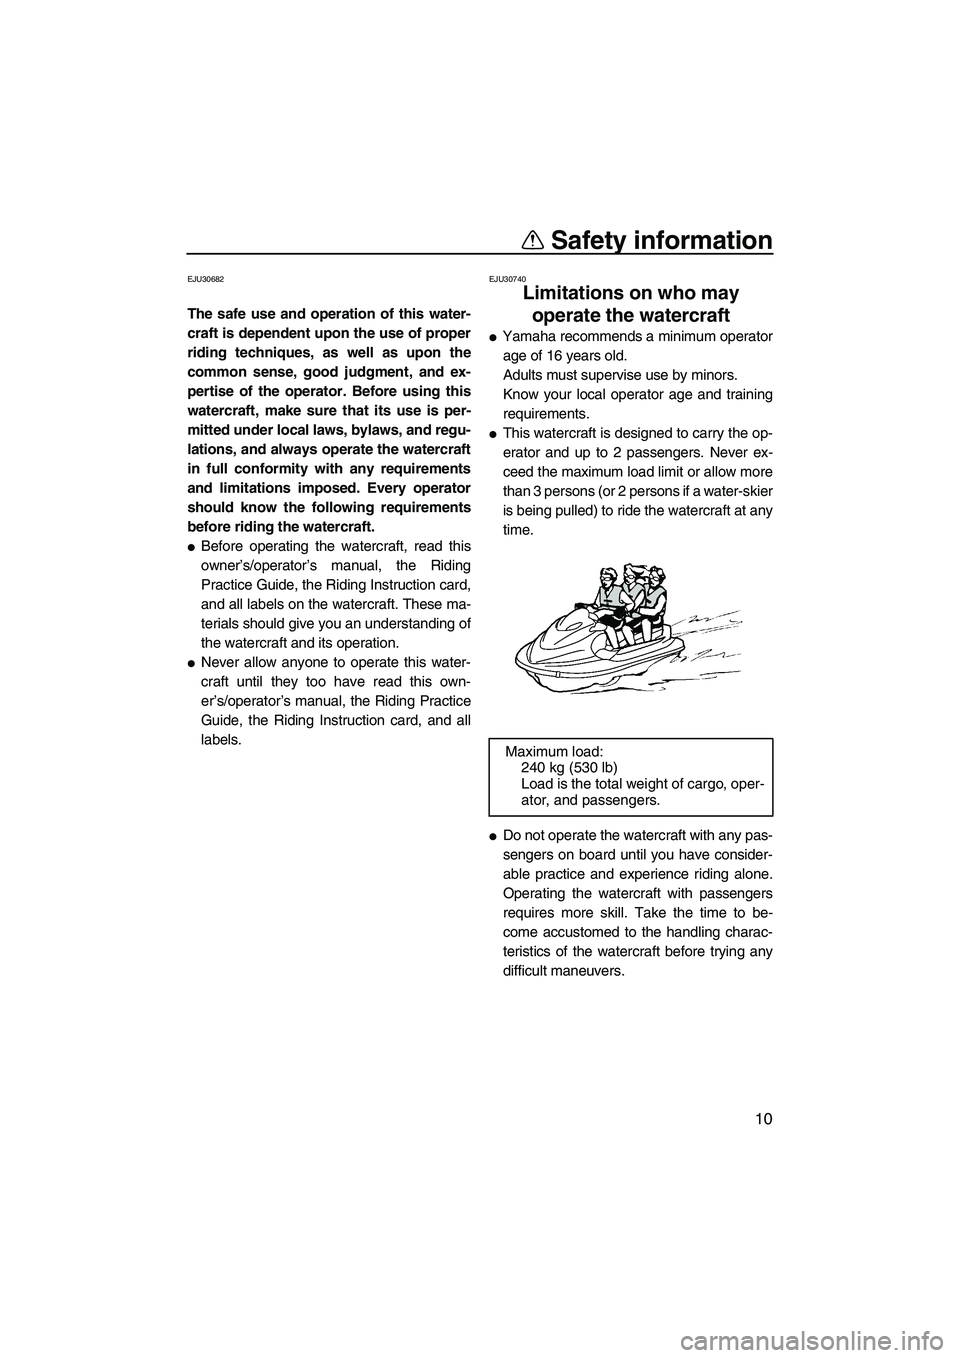 YAMAHA FZS 2010 User Guide Safety information
10
EJU30682
The safe use and operation of this water-
craft is dependent upon the use of proper
riding techniques, as well as upon the
common sense, good judgment, and ex-
pertise o